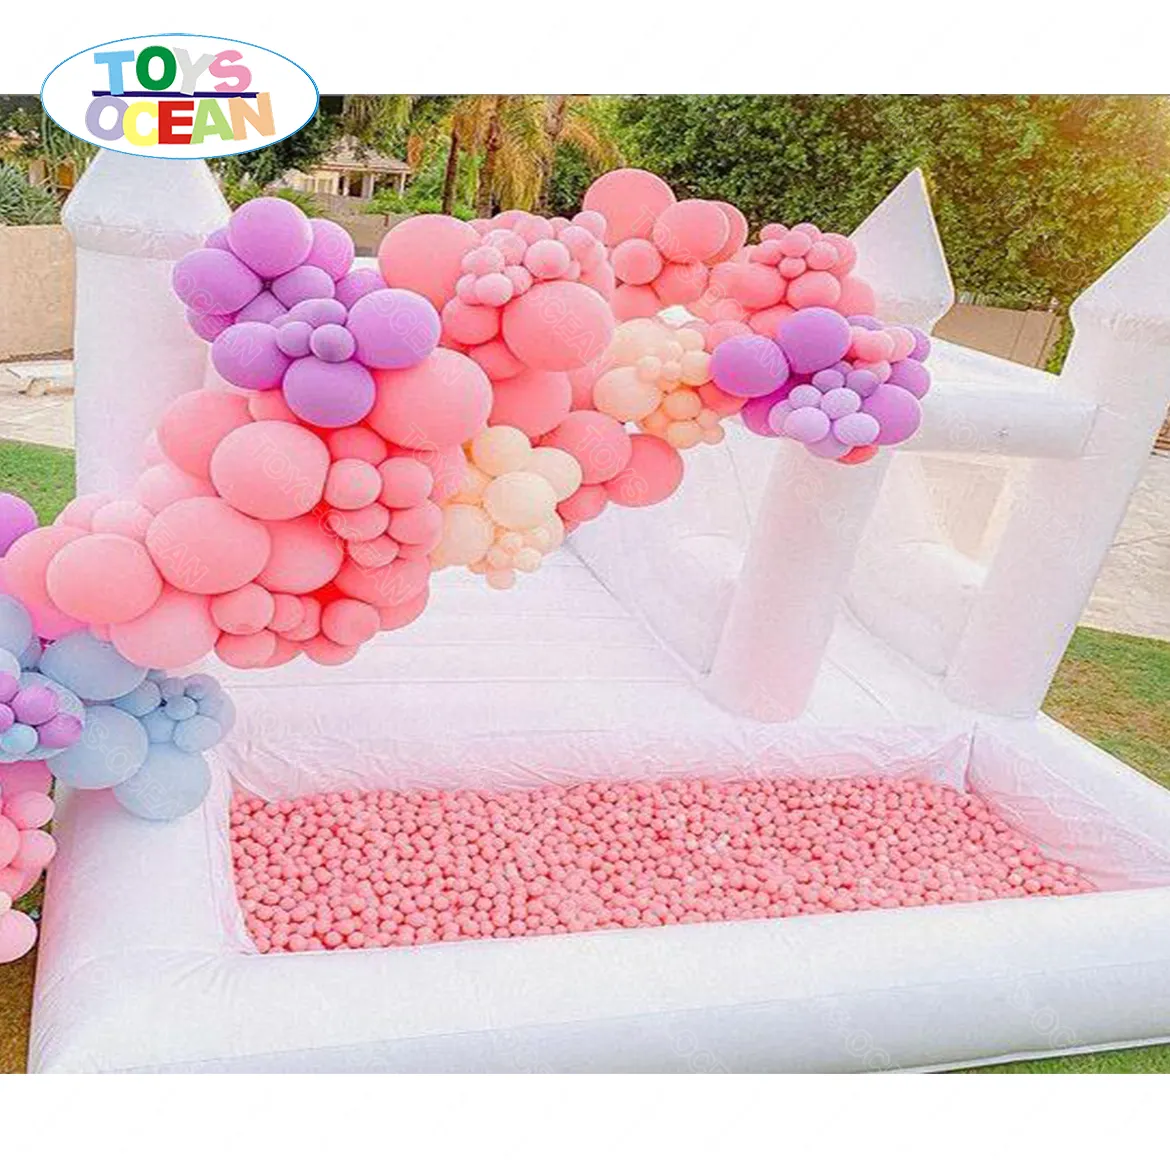 New Pastel Bouncy Castle Trẻ Em Bouncer Nhỏ Inflatable Wedding Bouncy Nhà Trắng Bounce Castle Với Ball Pit